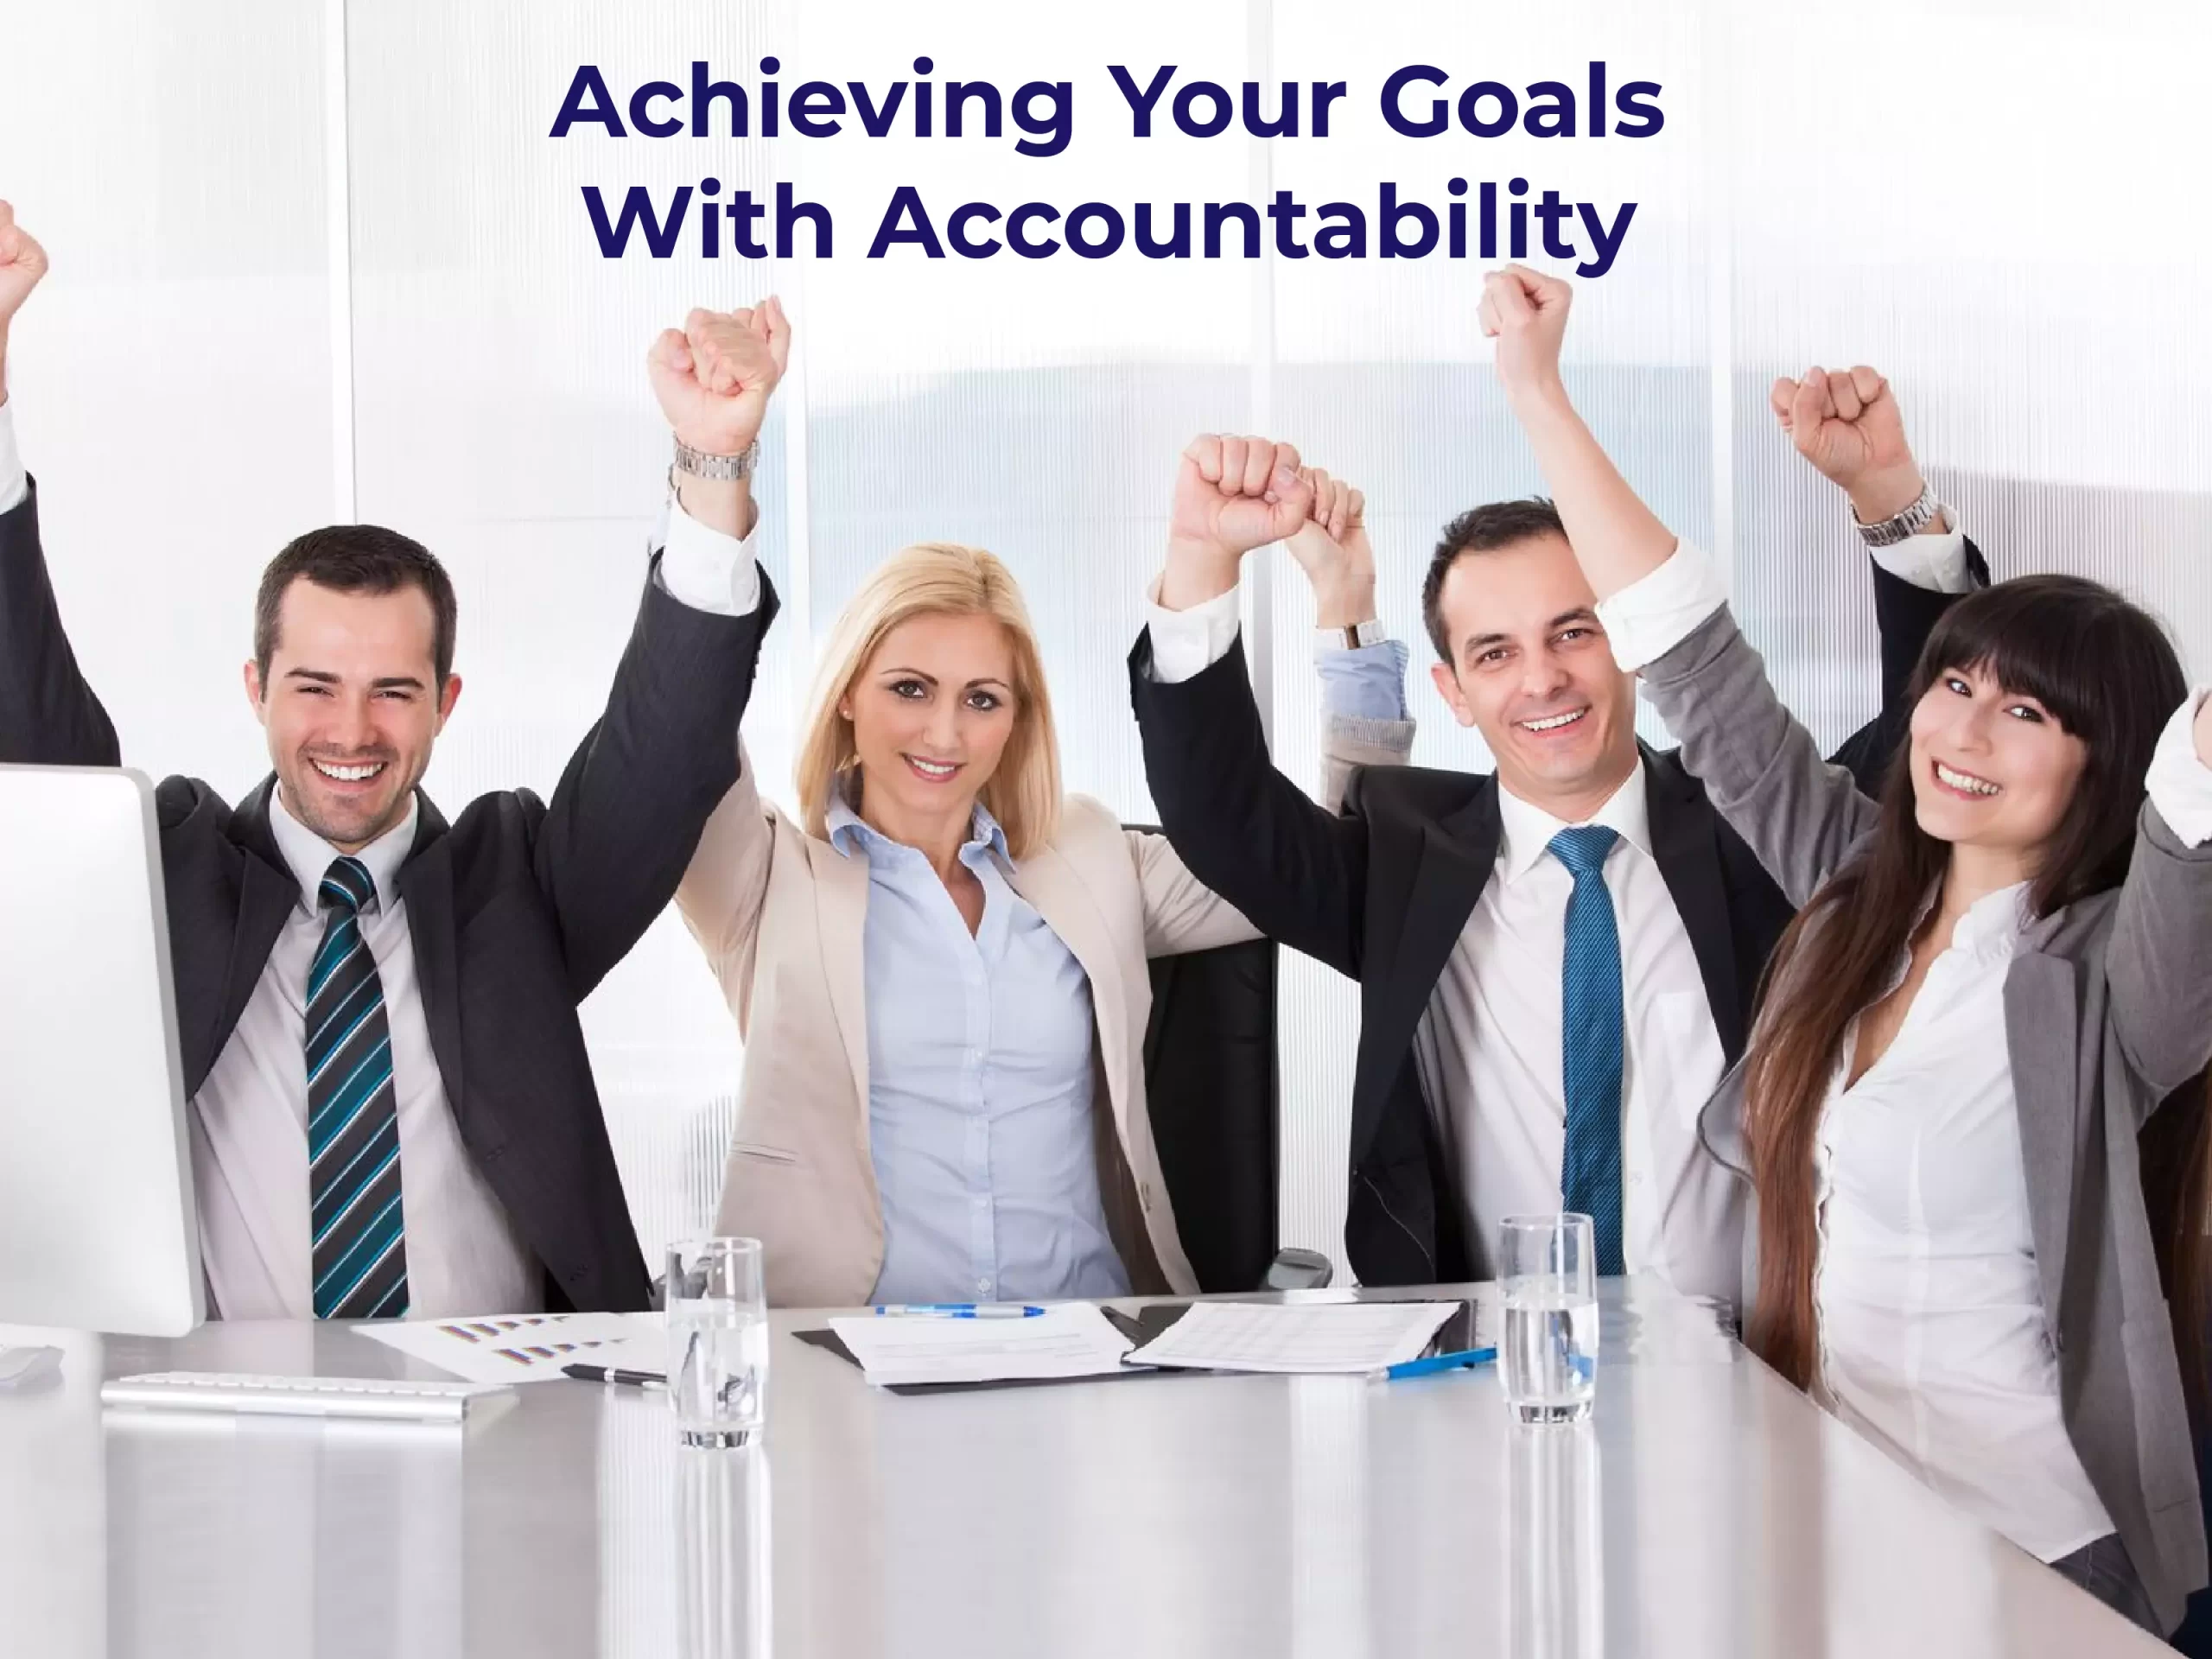 Achieve Your Goals With Accountability